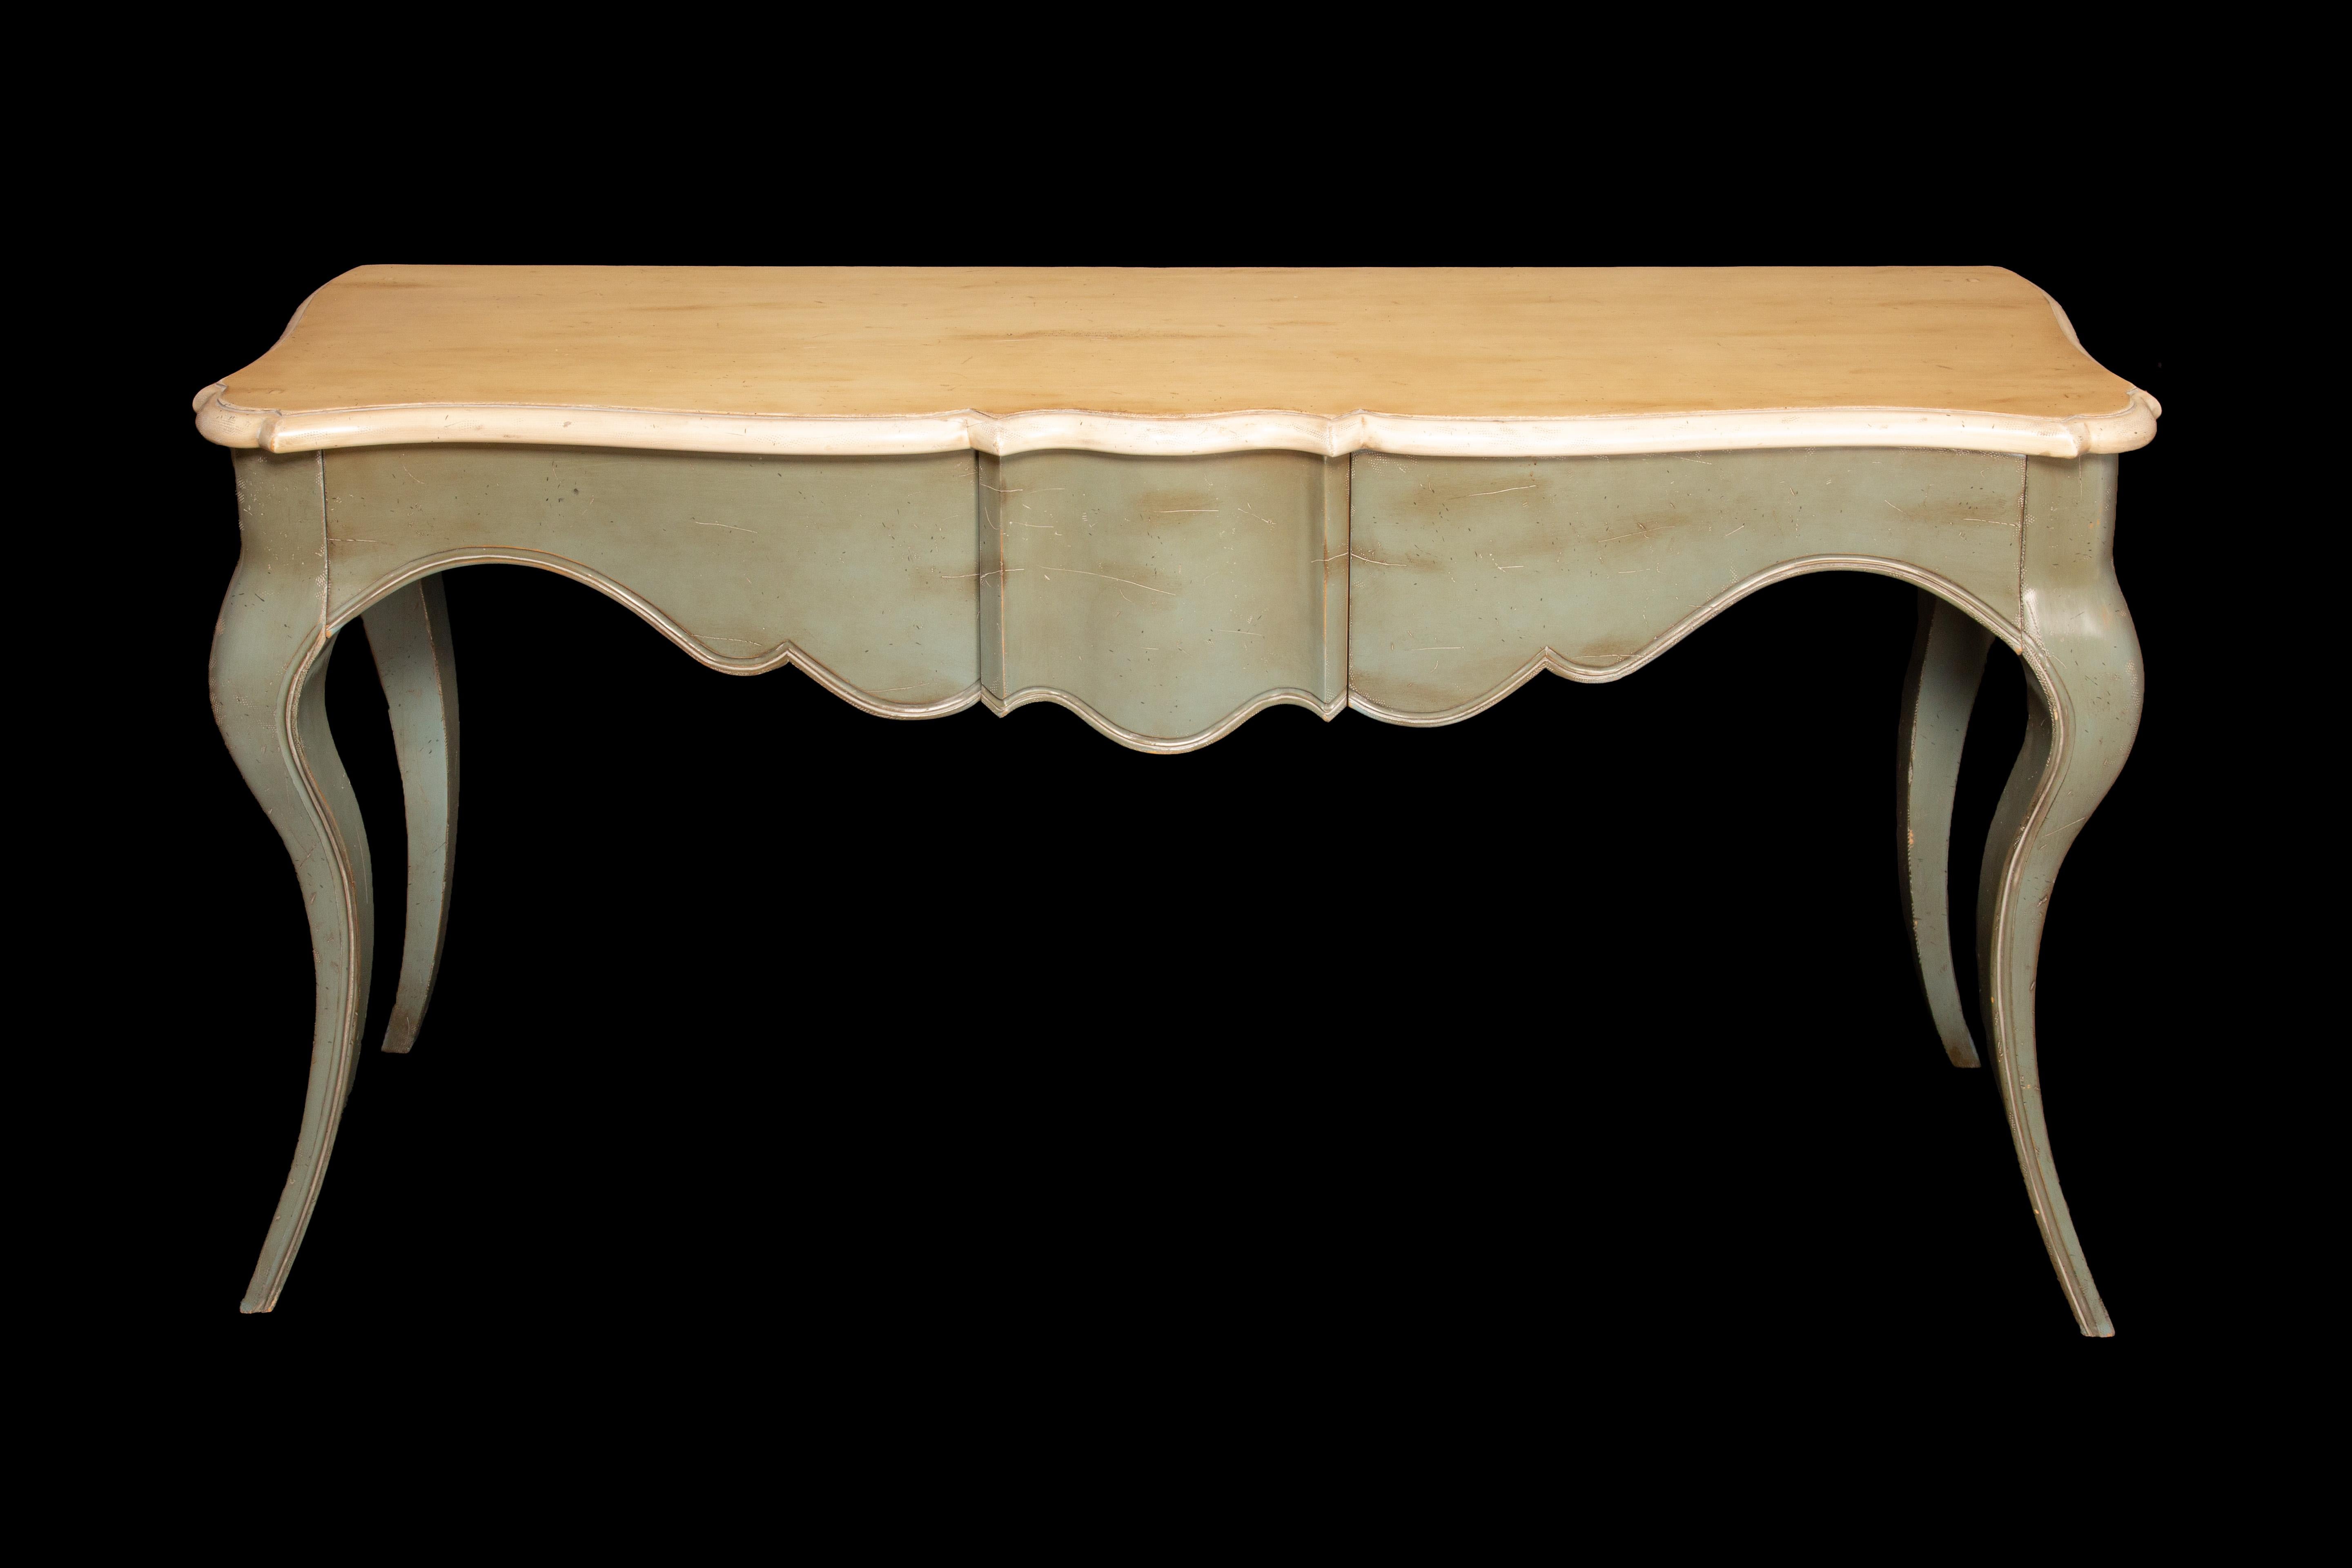 French Provincial style console with three dovetail drawers. Attributed to Grange.

Measures: 65